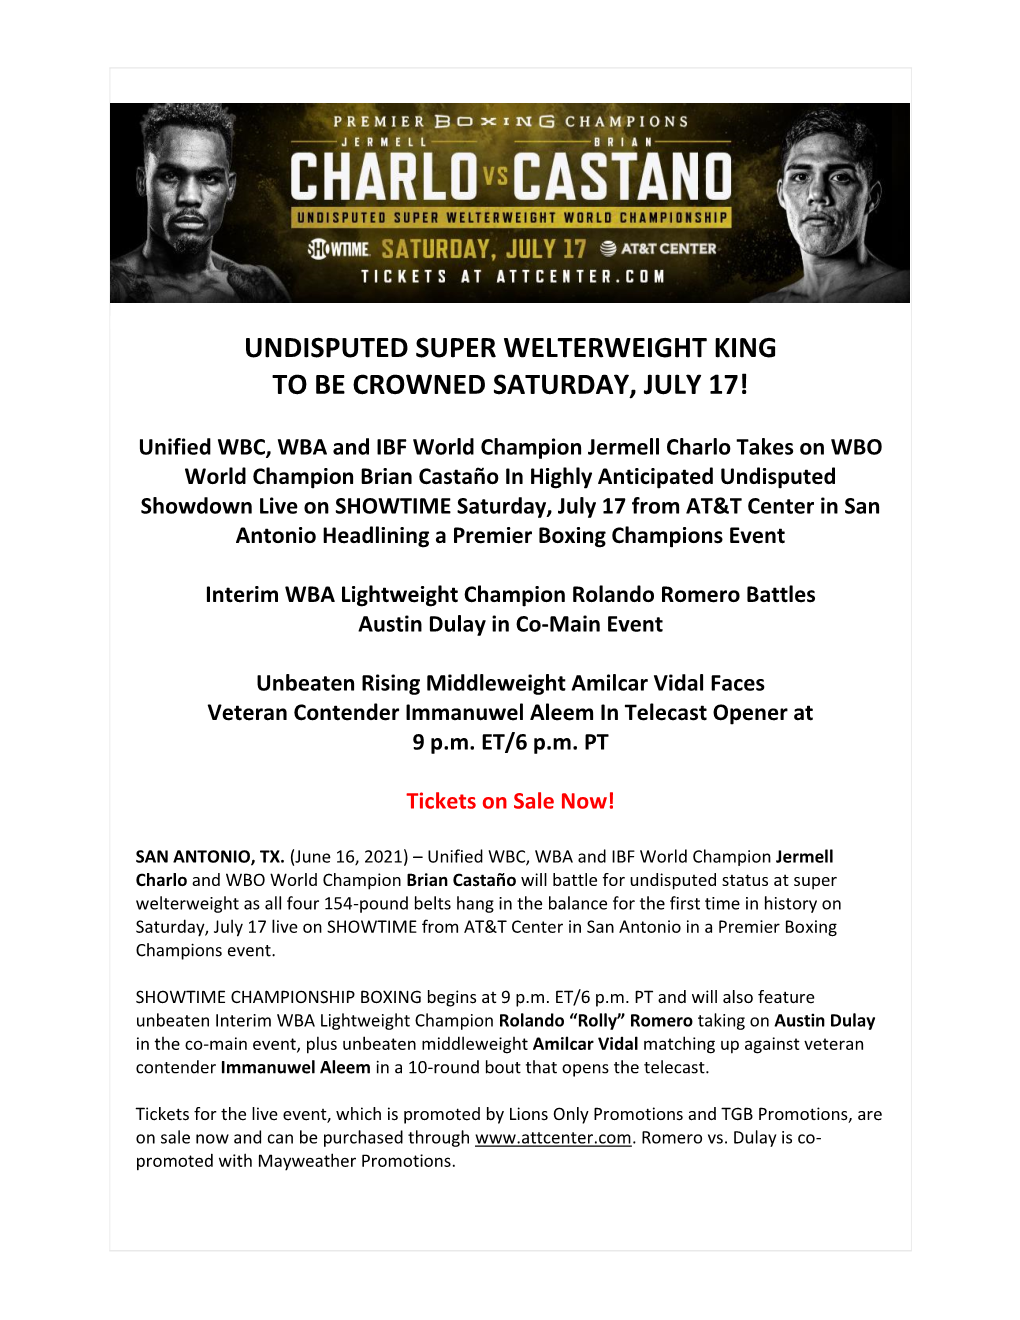 Undisputed Super Welterweight King to Be Crowned Saturday, July 17!